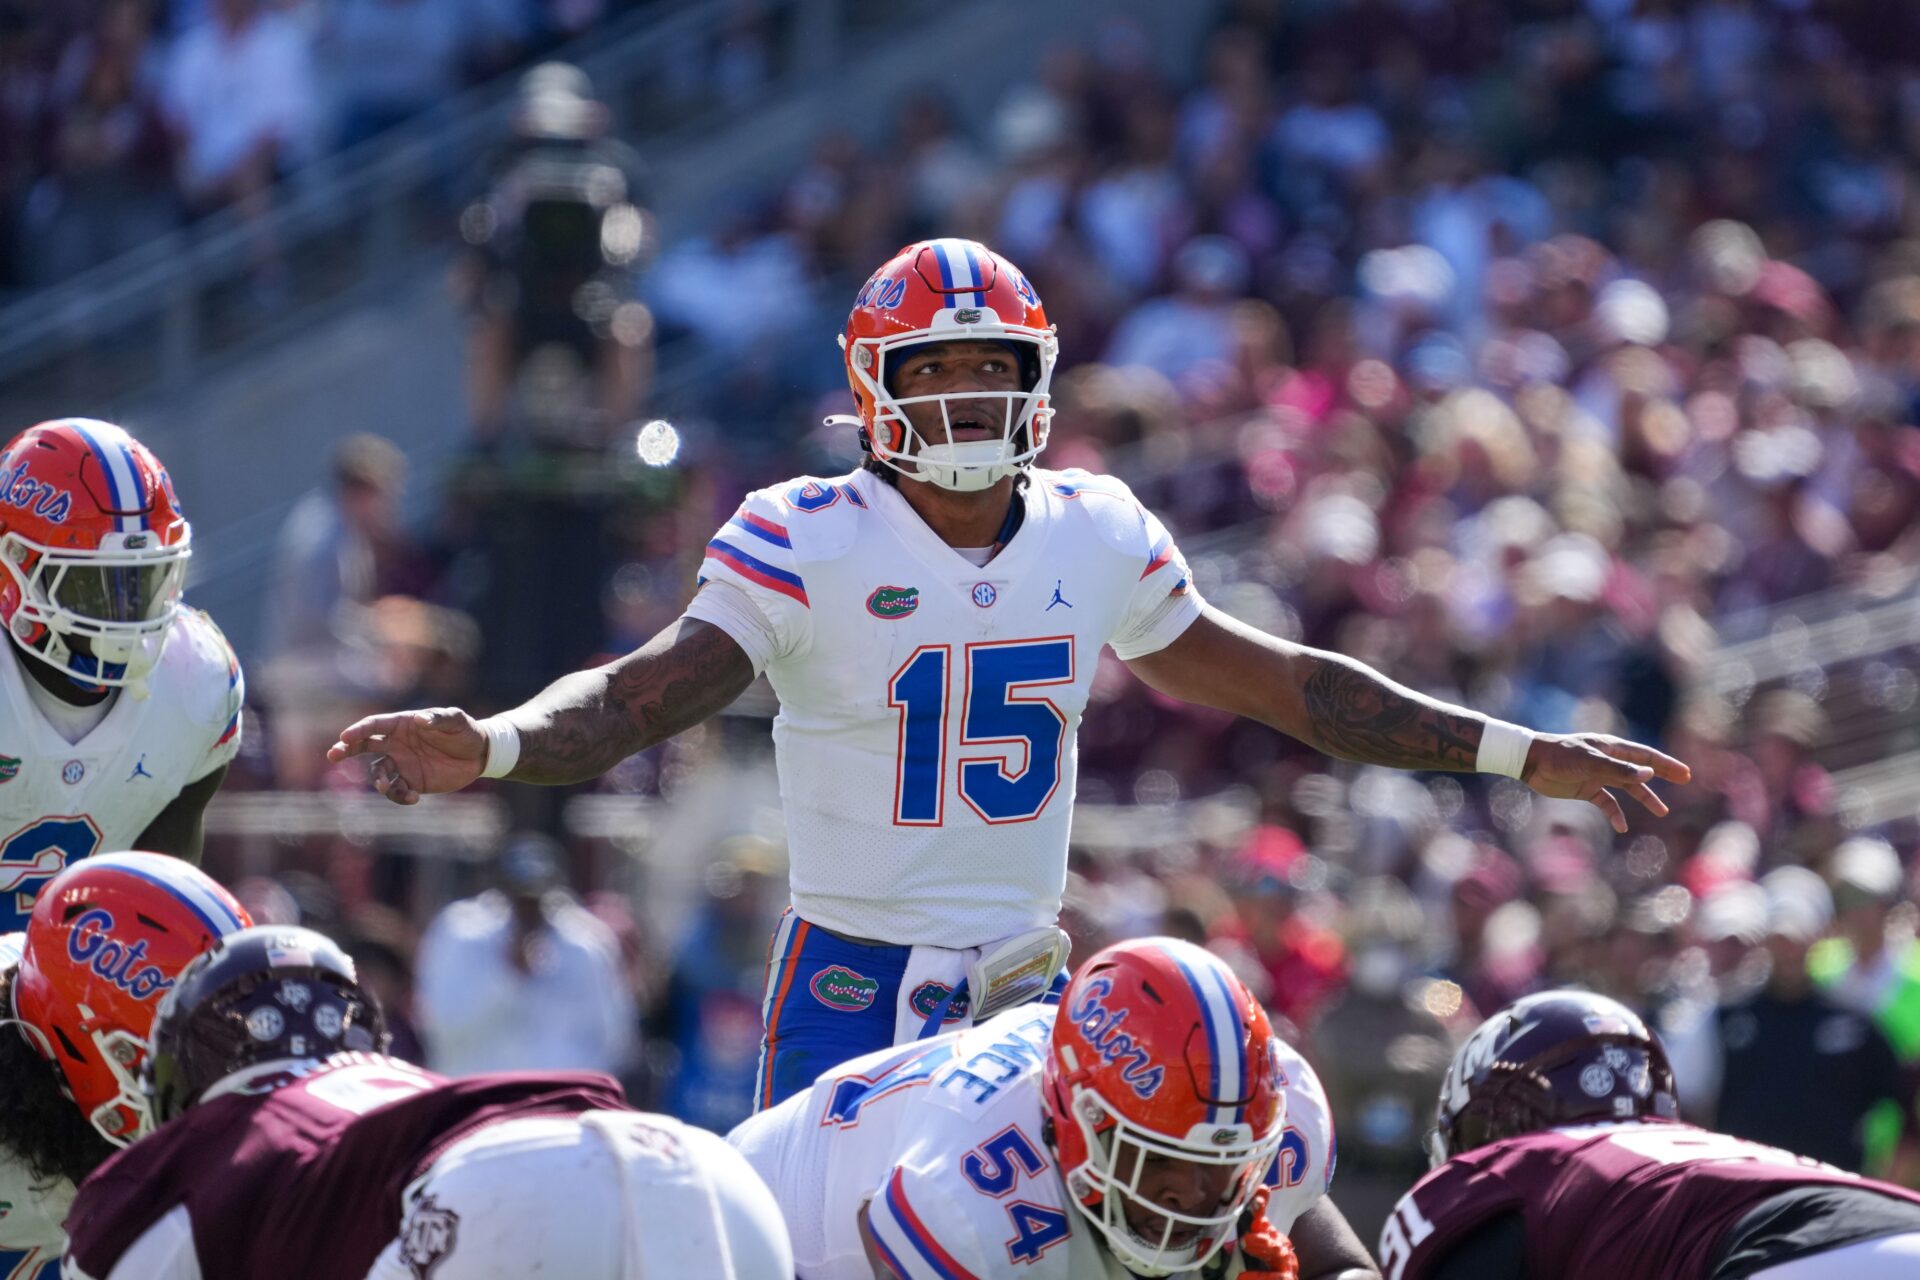 Florida QB Anthony Richardson (15) getting ready for a play against Texas A&M.